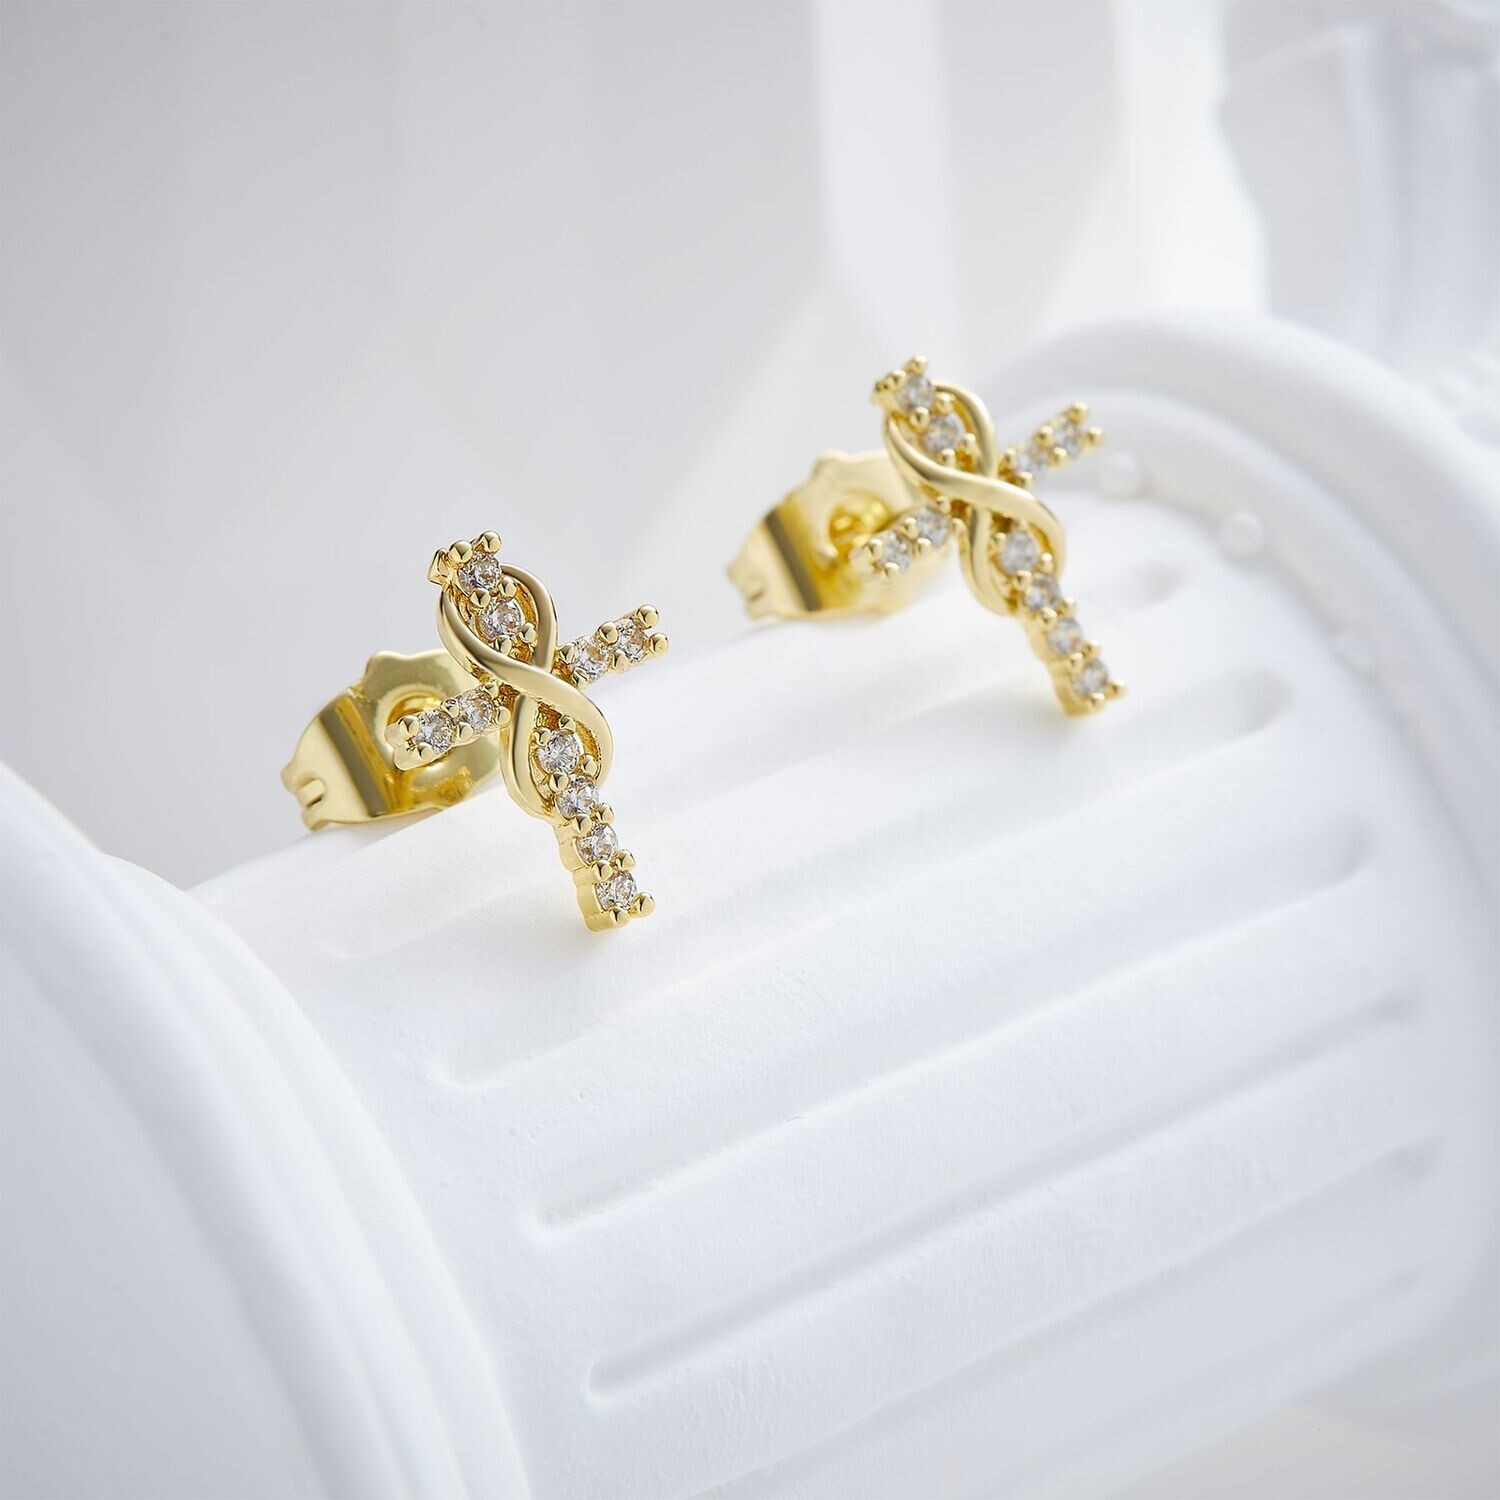 Vintage fashion jewelry stud Girls adults gold plated cross earrings